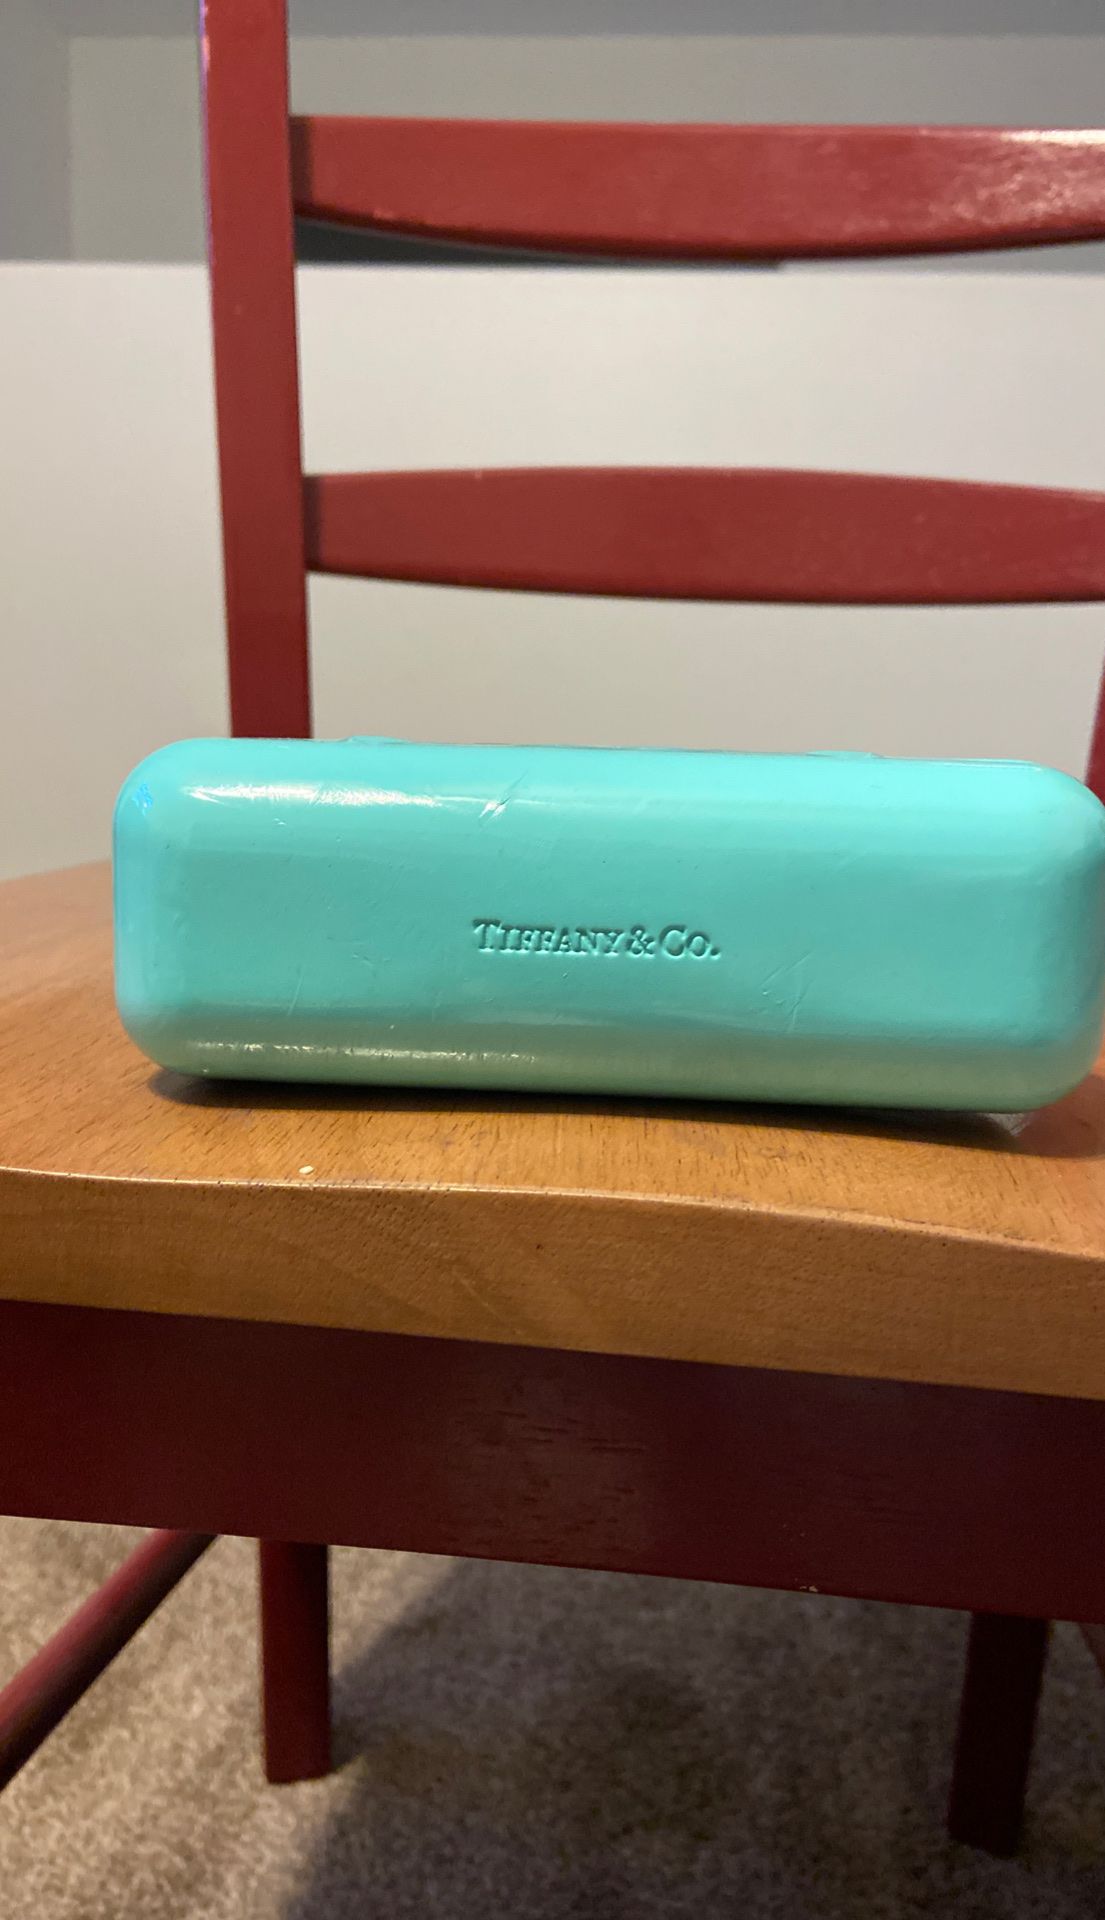 Authentic Tiffany Eyeglasses with Case.